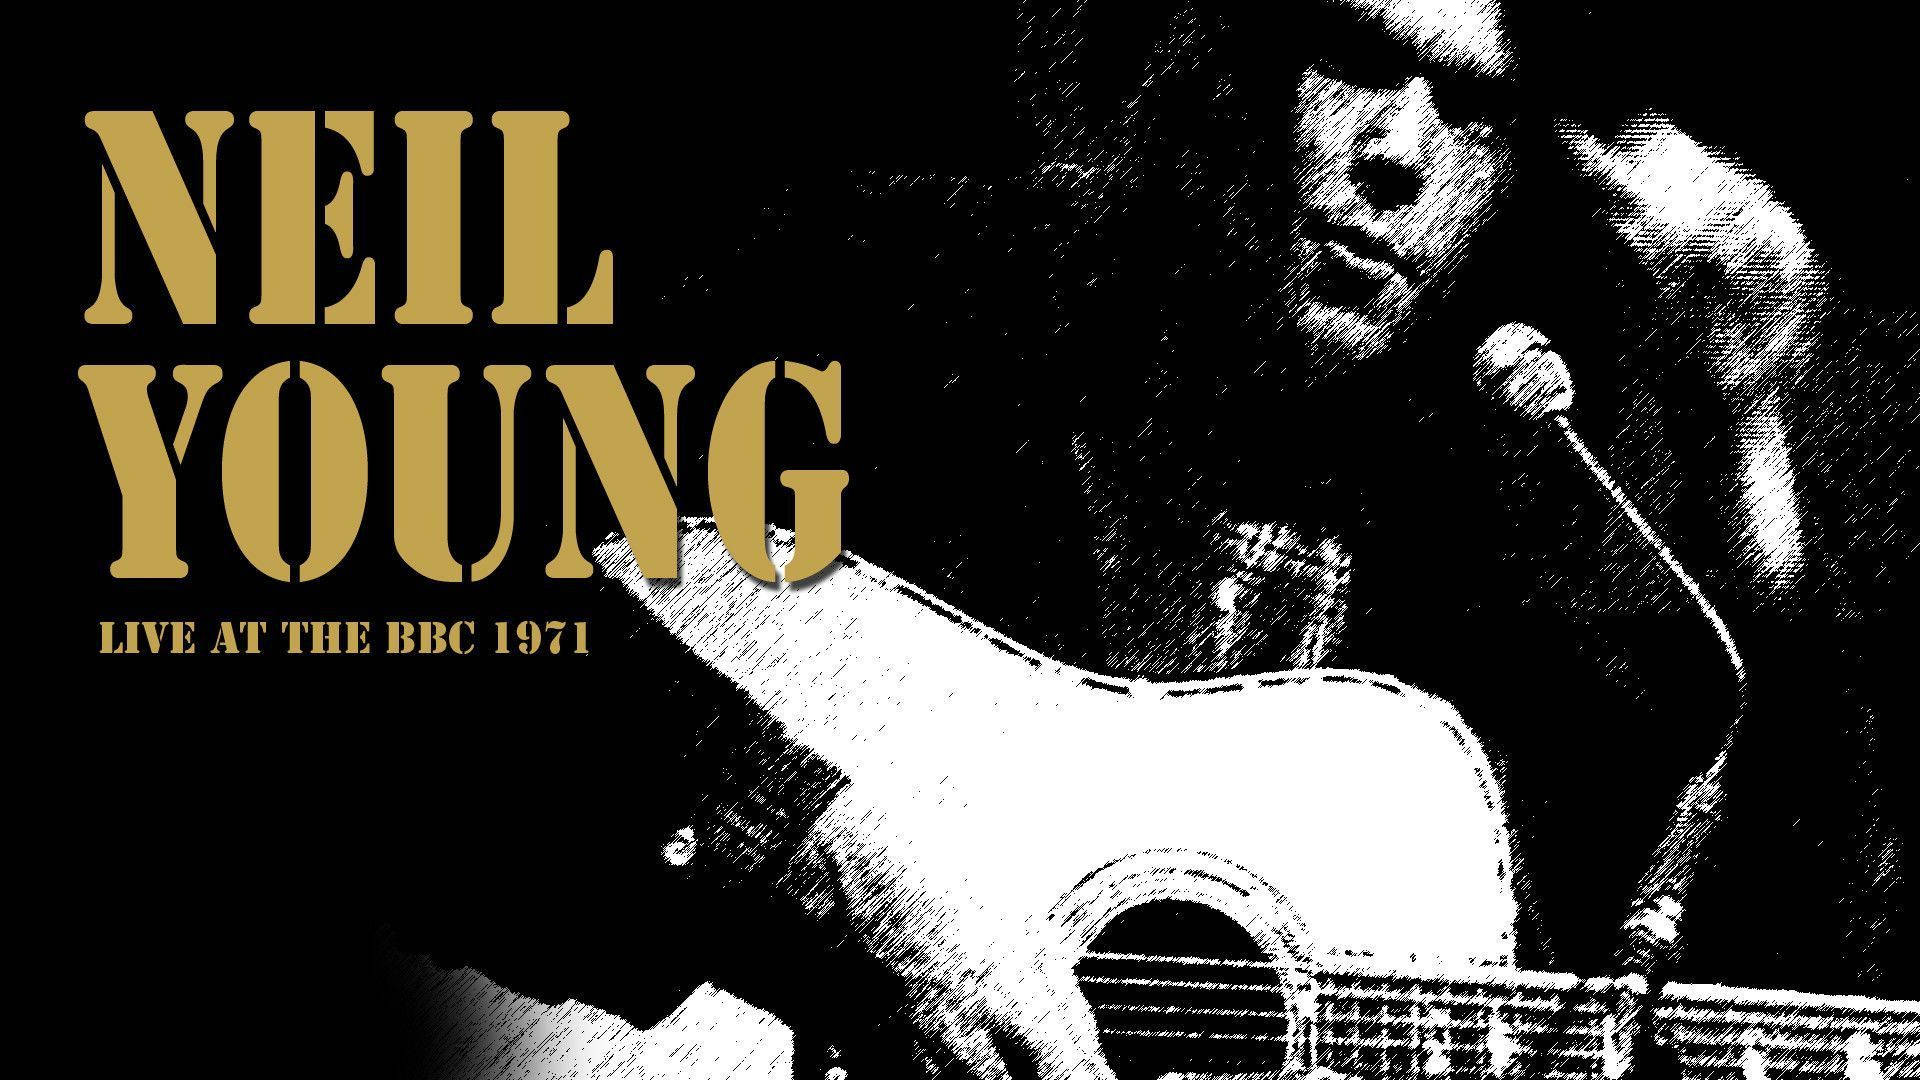 Rock Masters Concert Neil Young Background